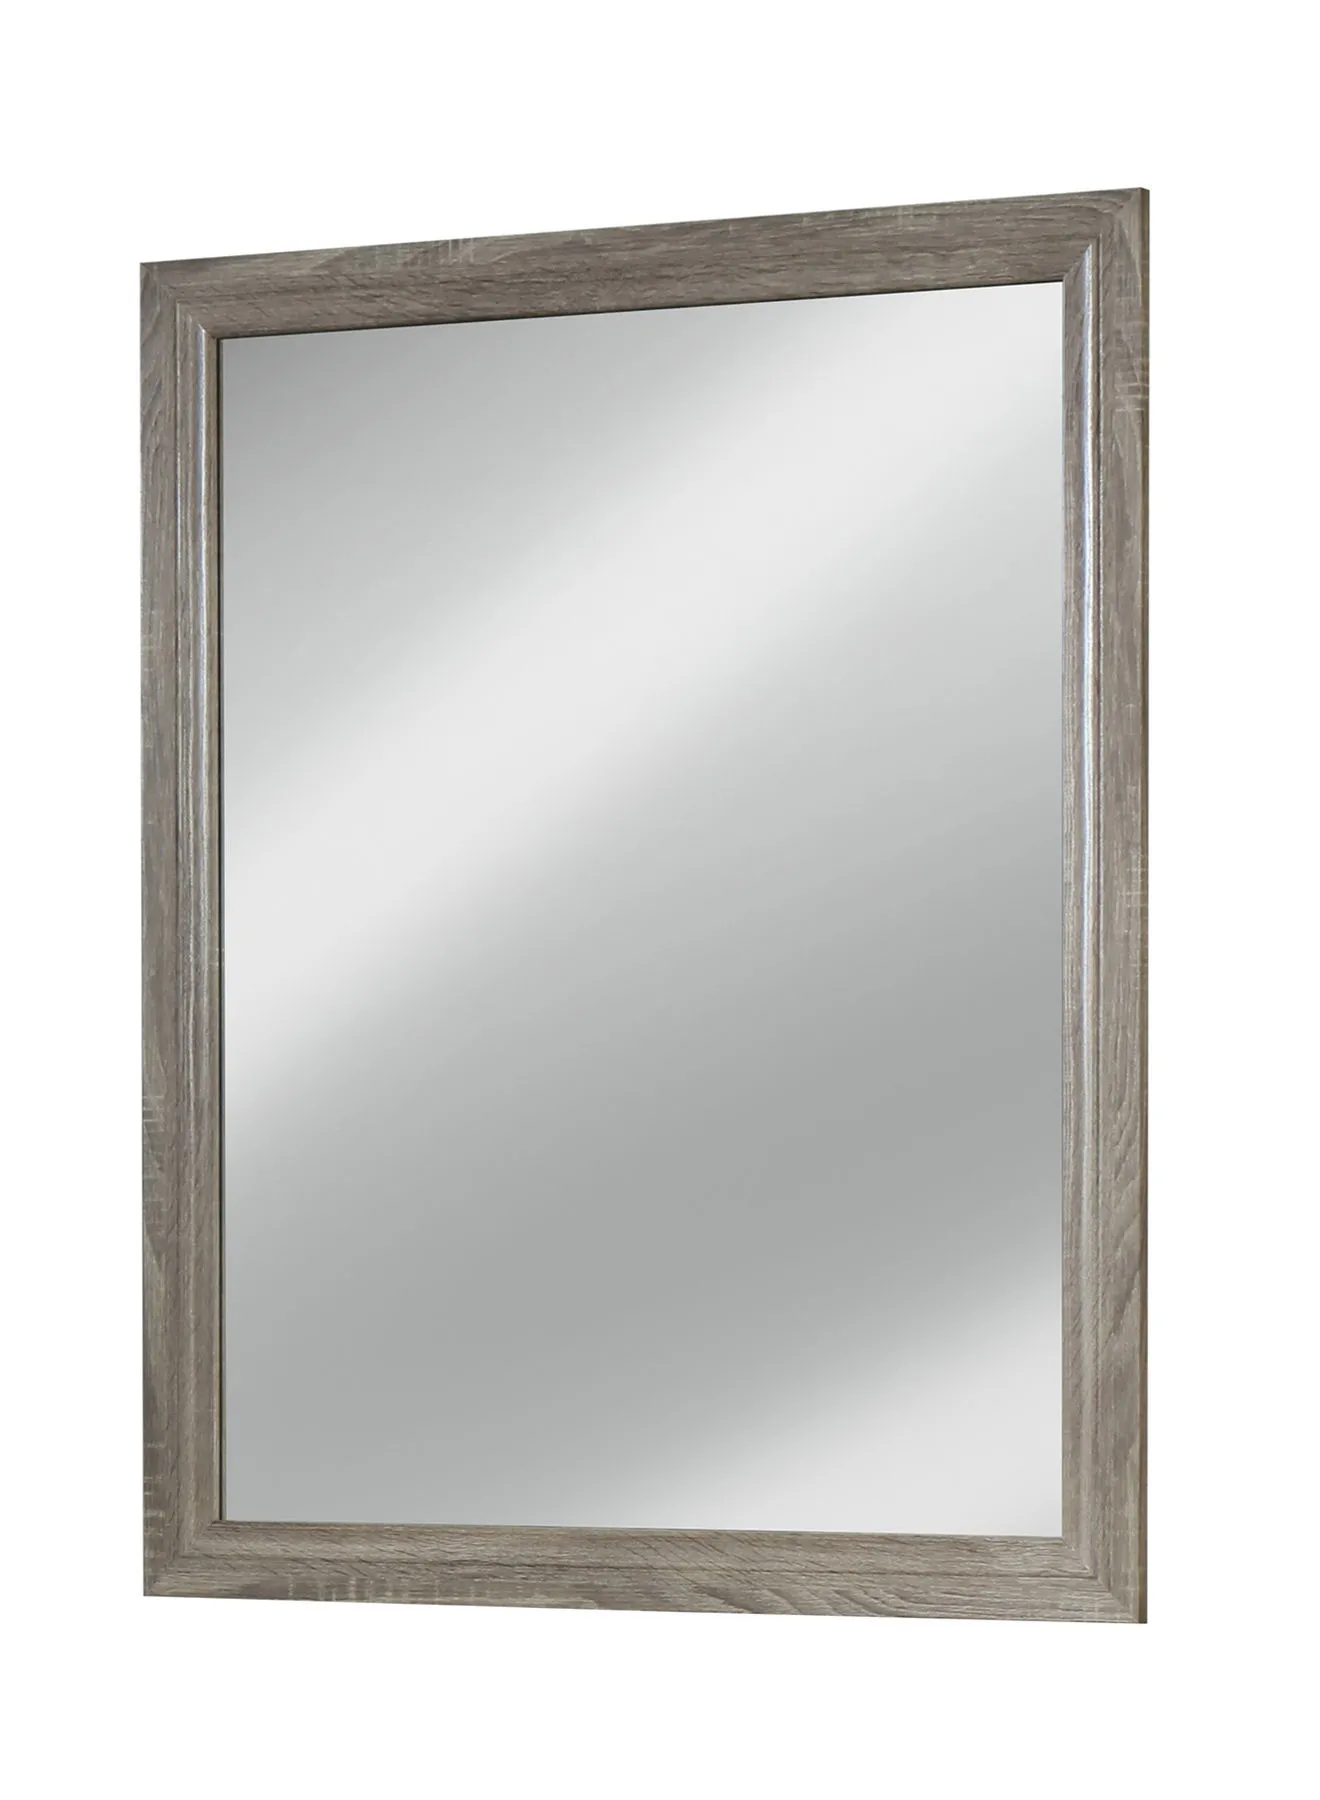 ebb & flow Beegee Series Vanity Mirror Unique Luxury Quality Material For The Perfect Stylish Home Medium Sonoma Oak 800 x 18 x 1010millimeter